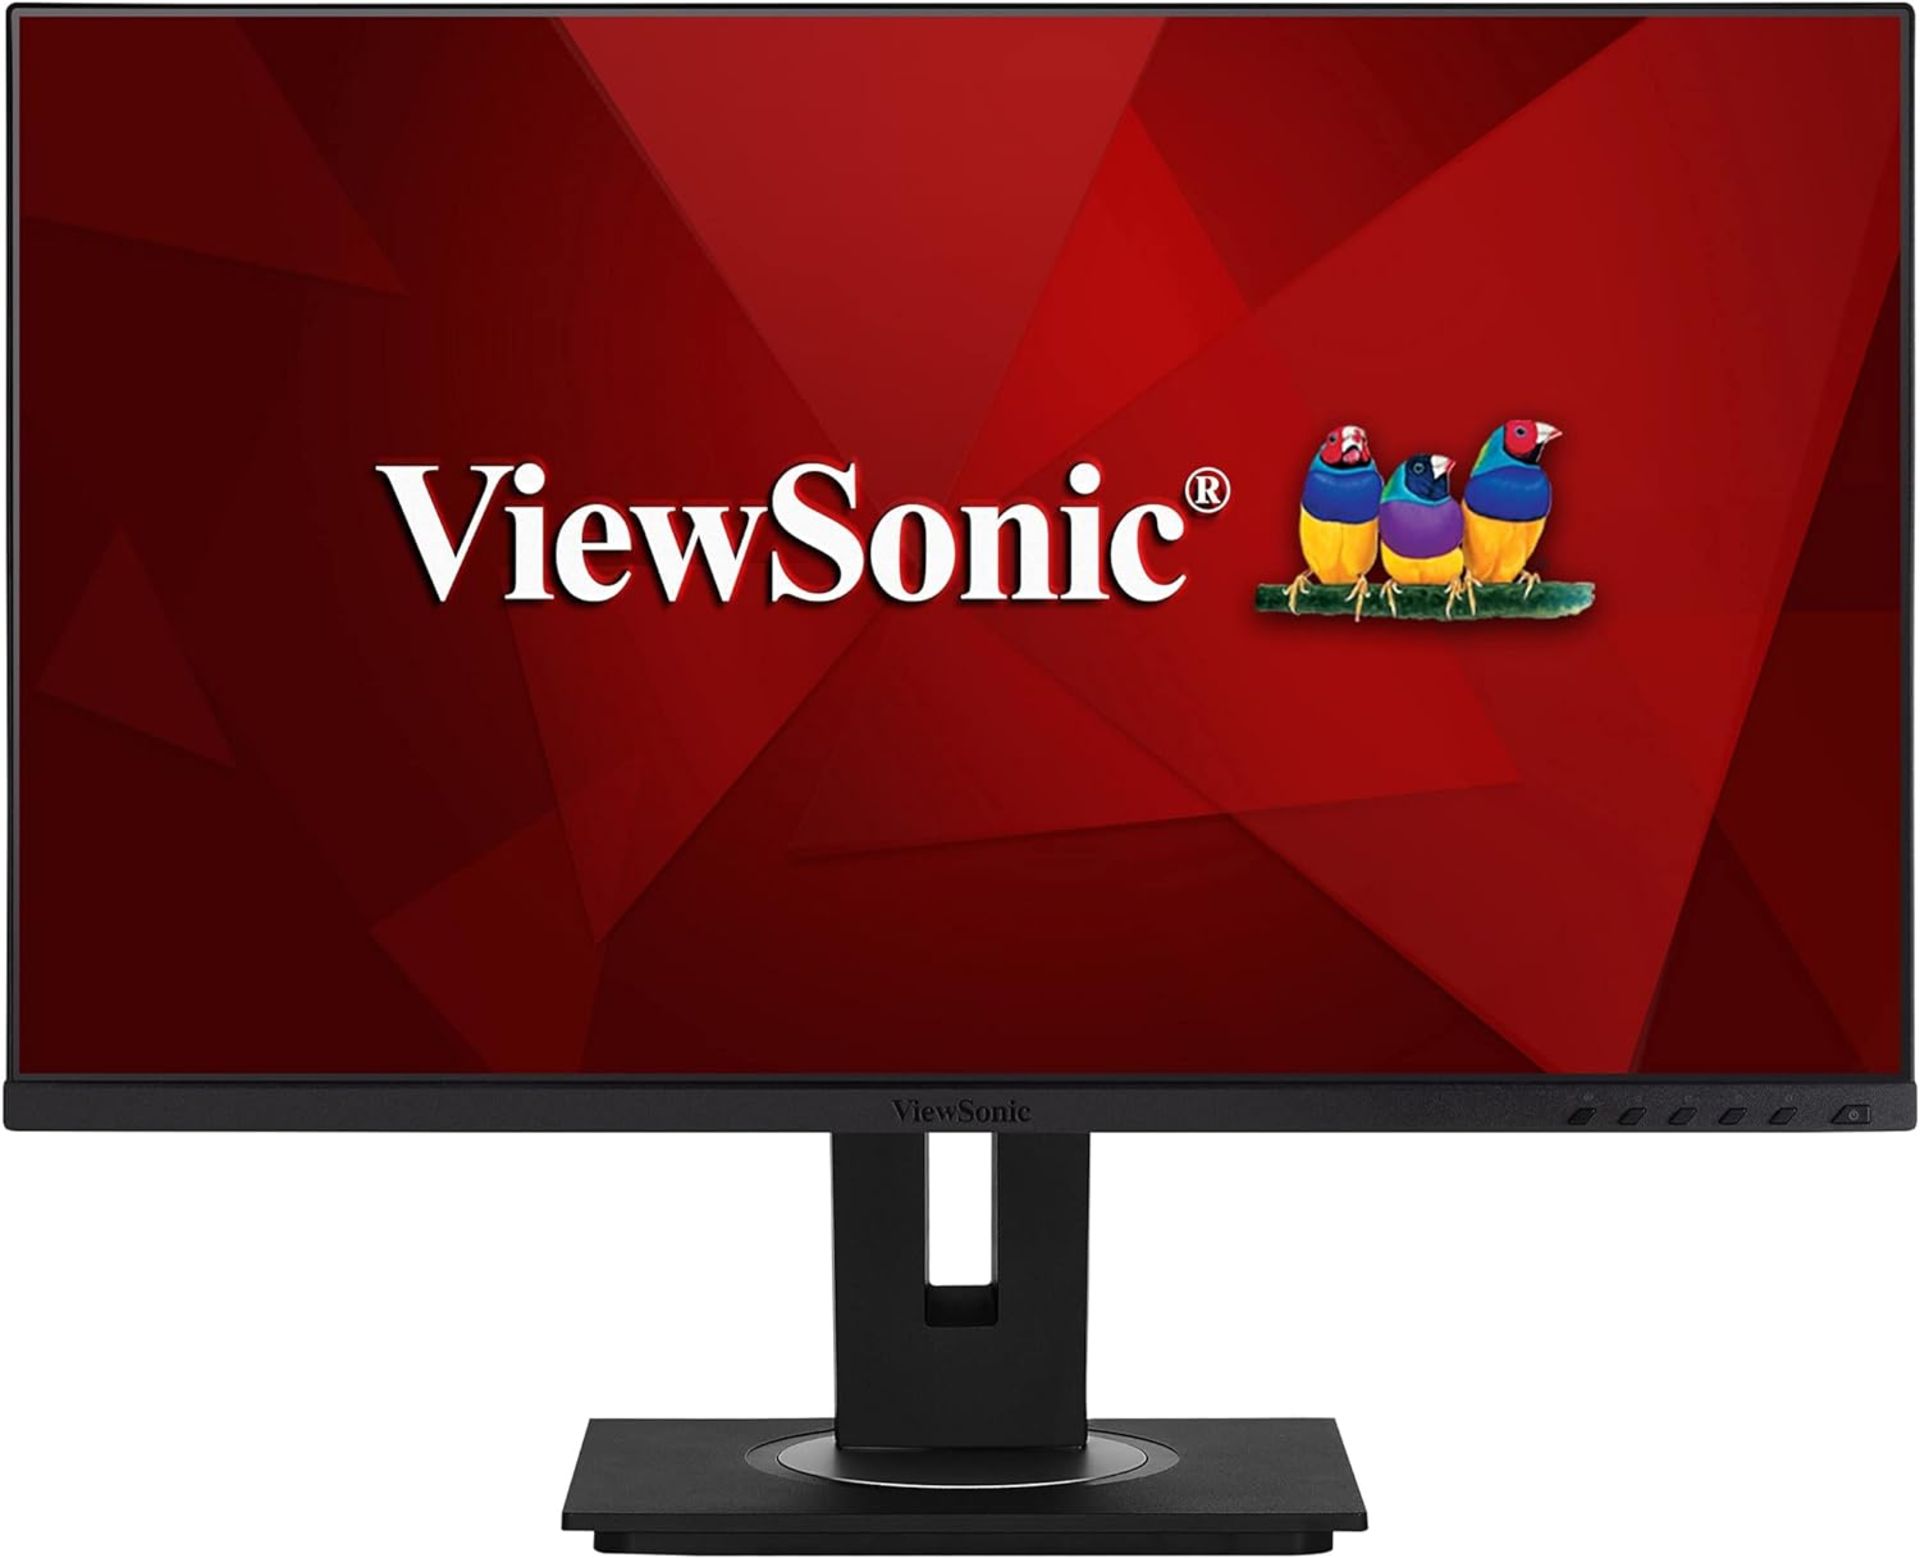 VIEWSONIC VG2755 27 Inch IPS Full HD Ergonomic Monitor. RRP £175. (PCKBW). IDEAL FOR WORK & STUDY AT - Image 2 of 6